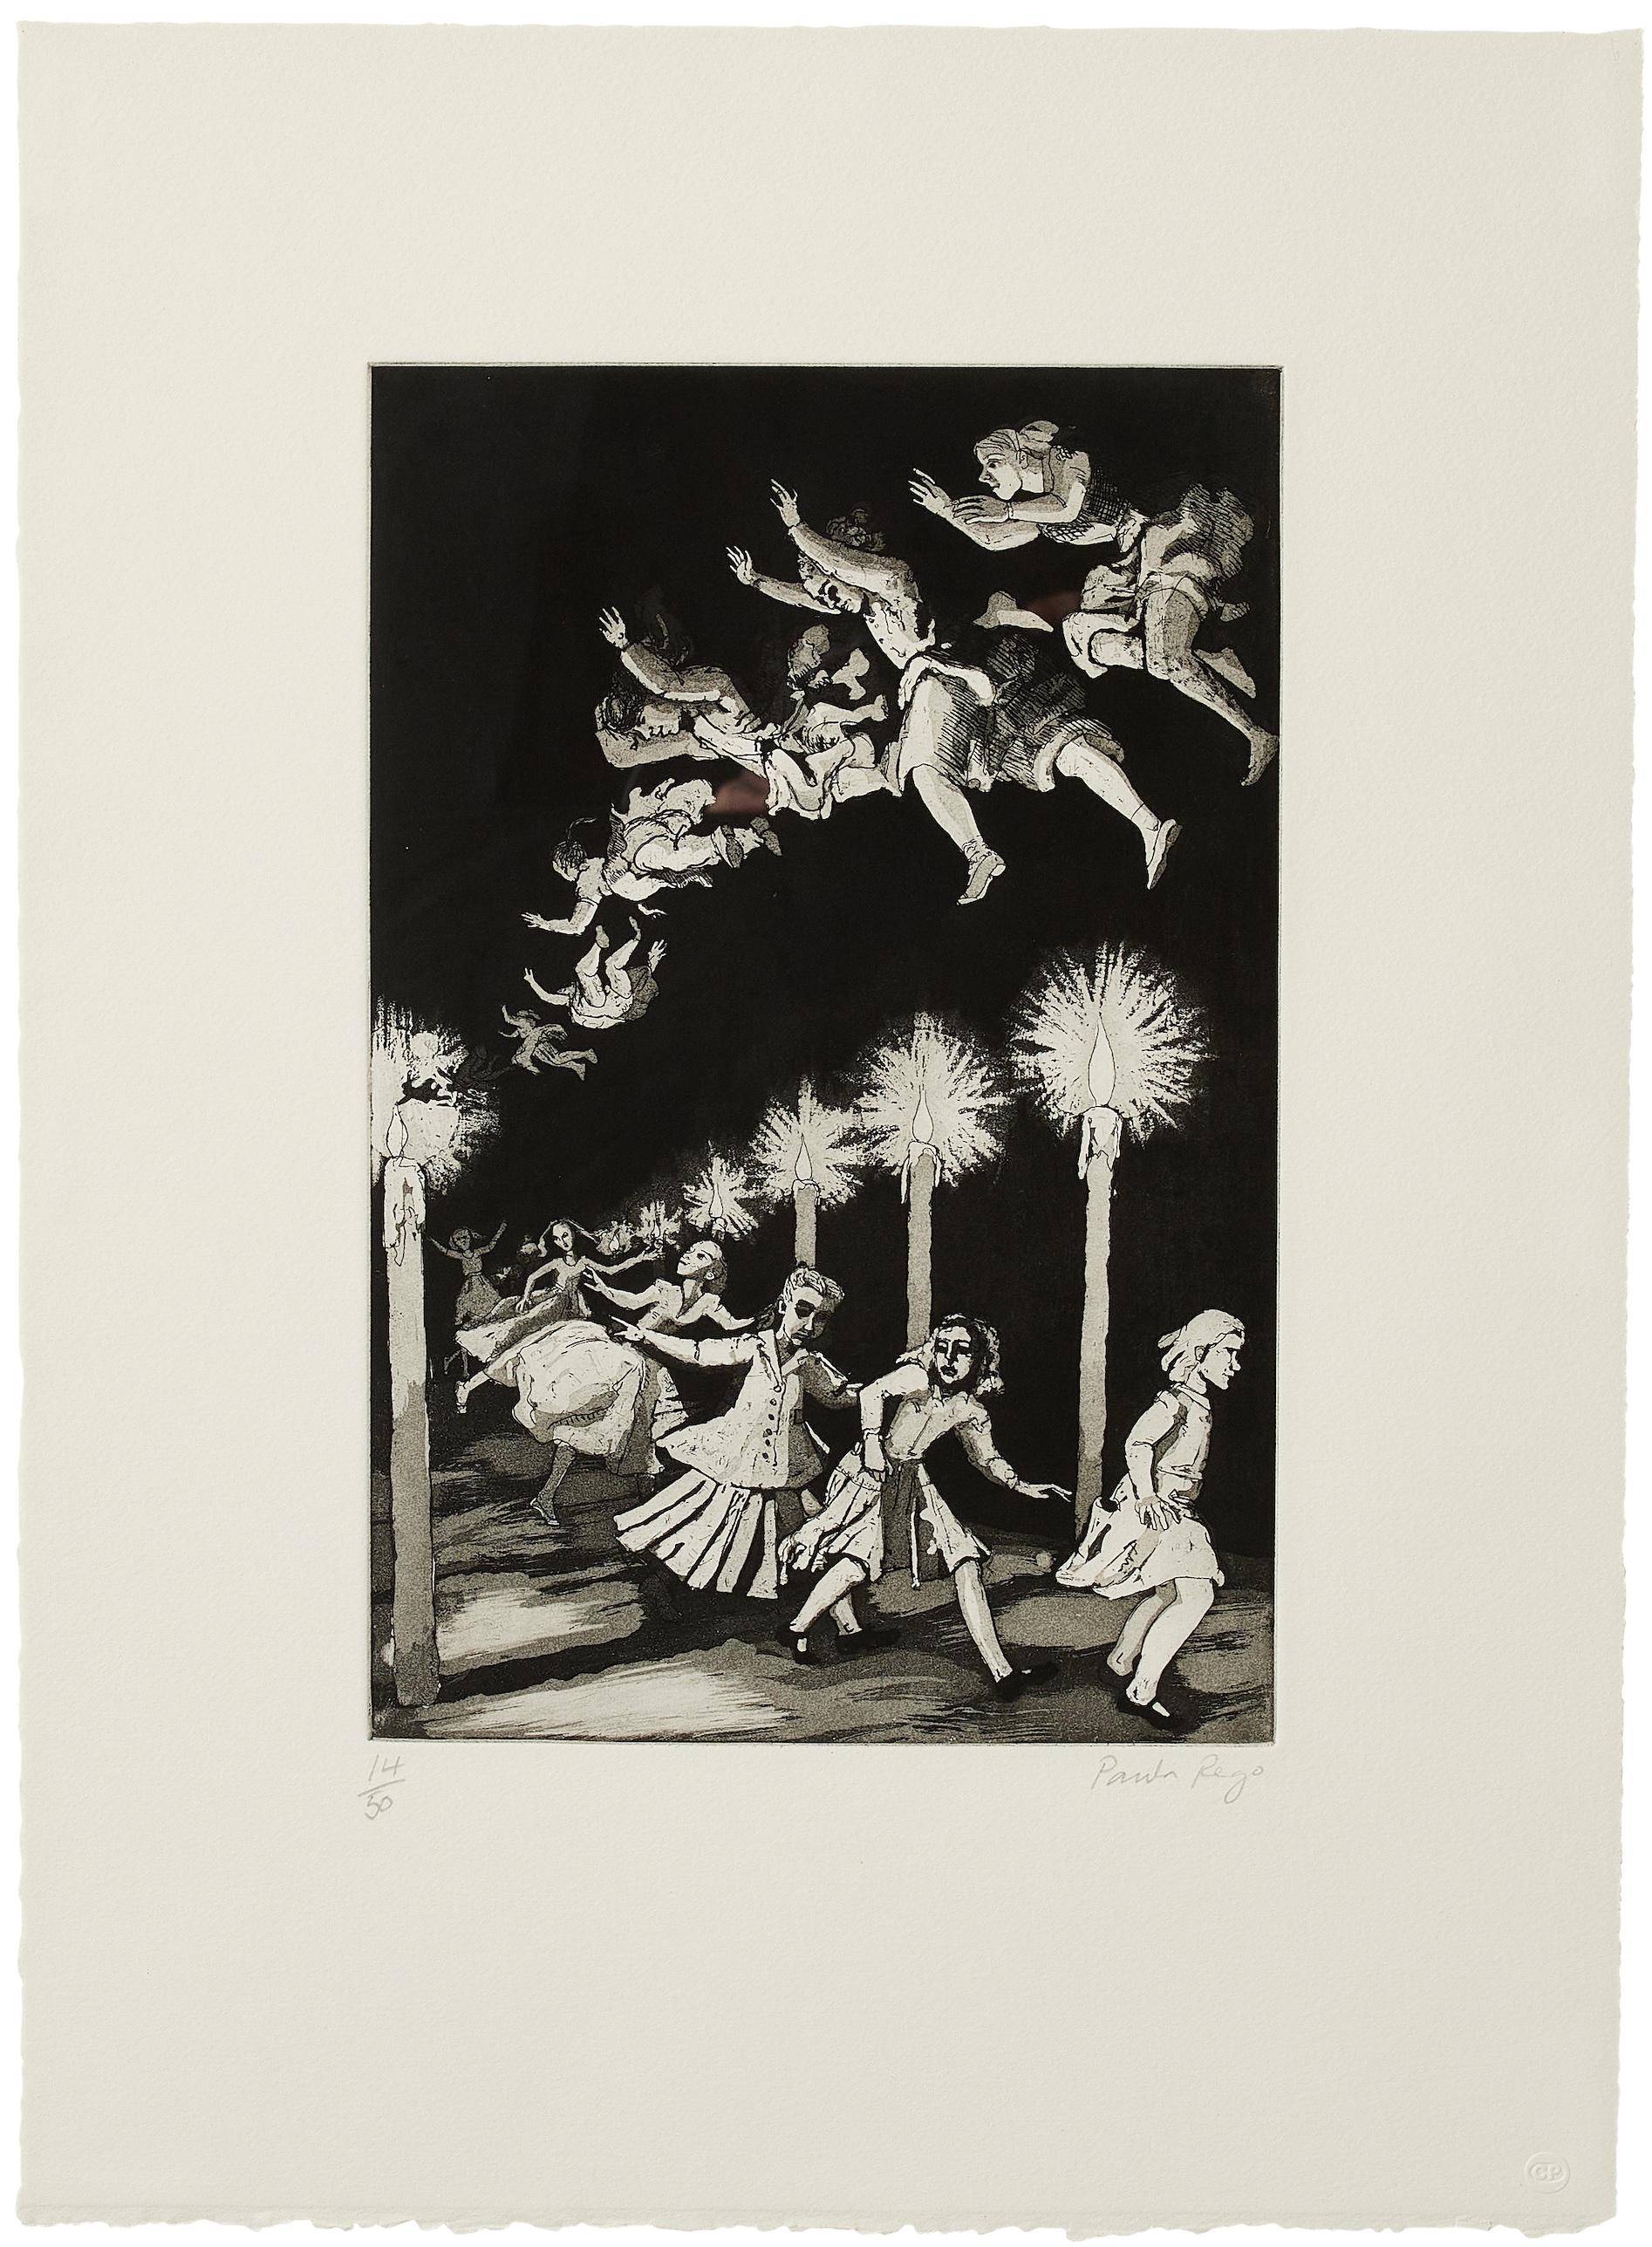 How Many Miles to Babylon -- Print, Etching, Nursery Rhymes by Paula Rego